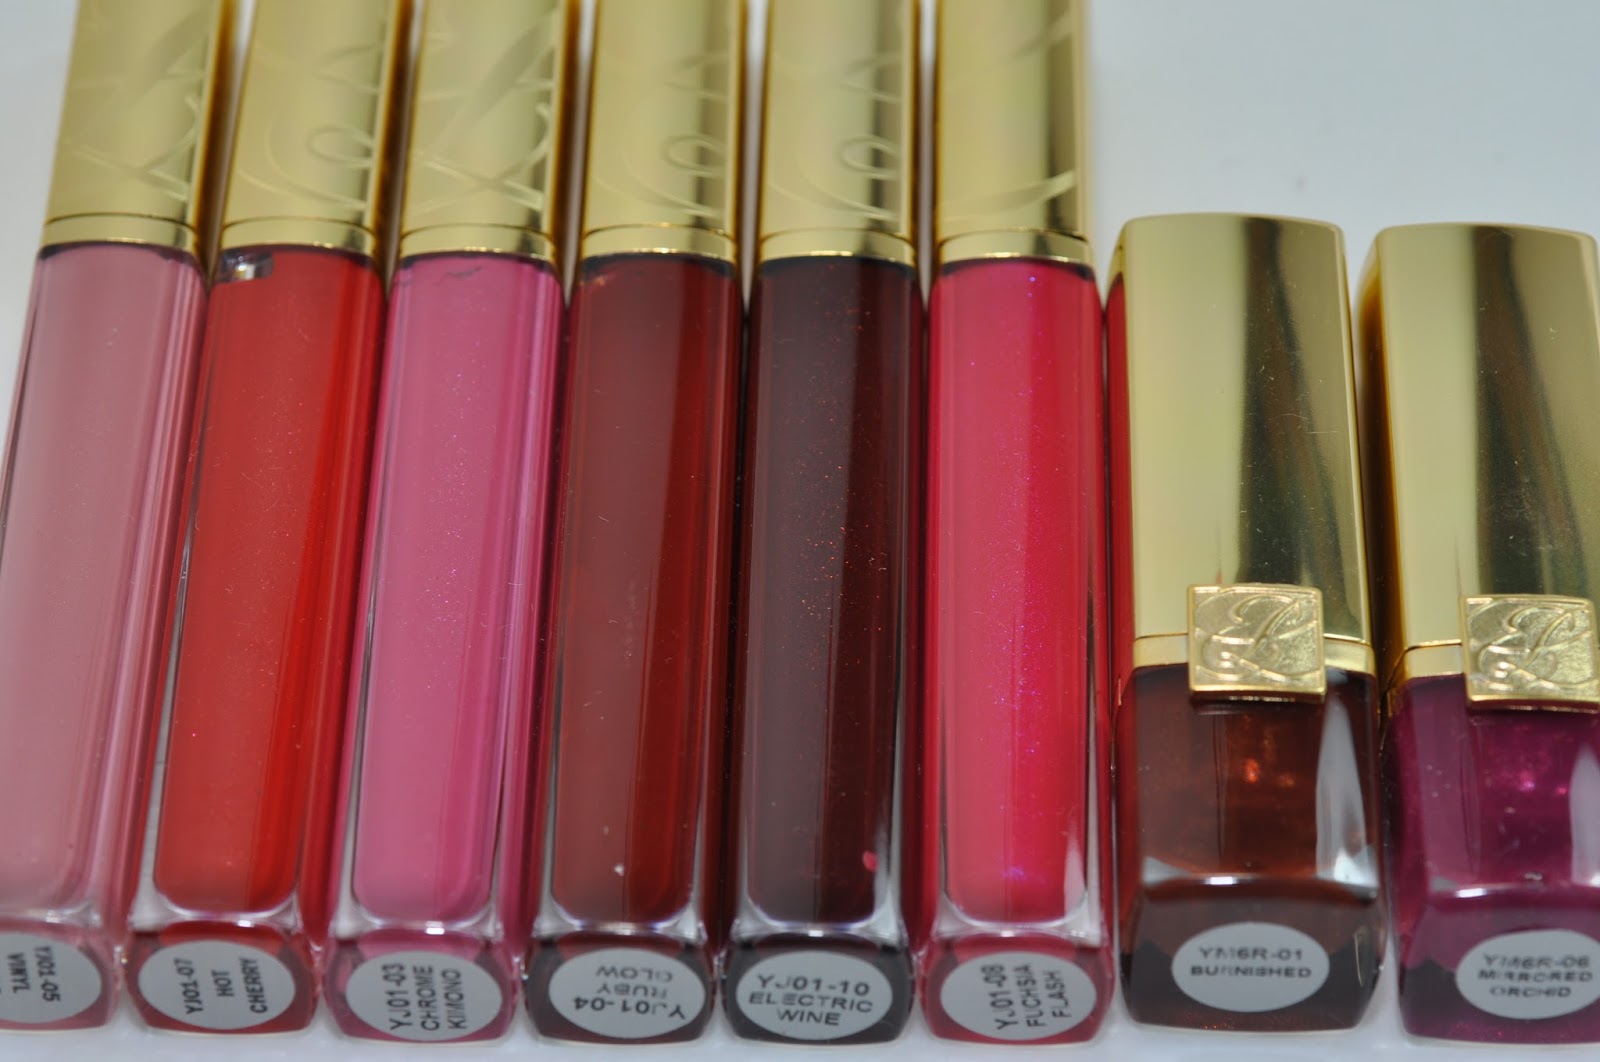 Chanel Limited Sheer Genius 3 Lip Gloss Trio Set In Purse Bag New